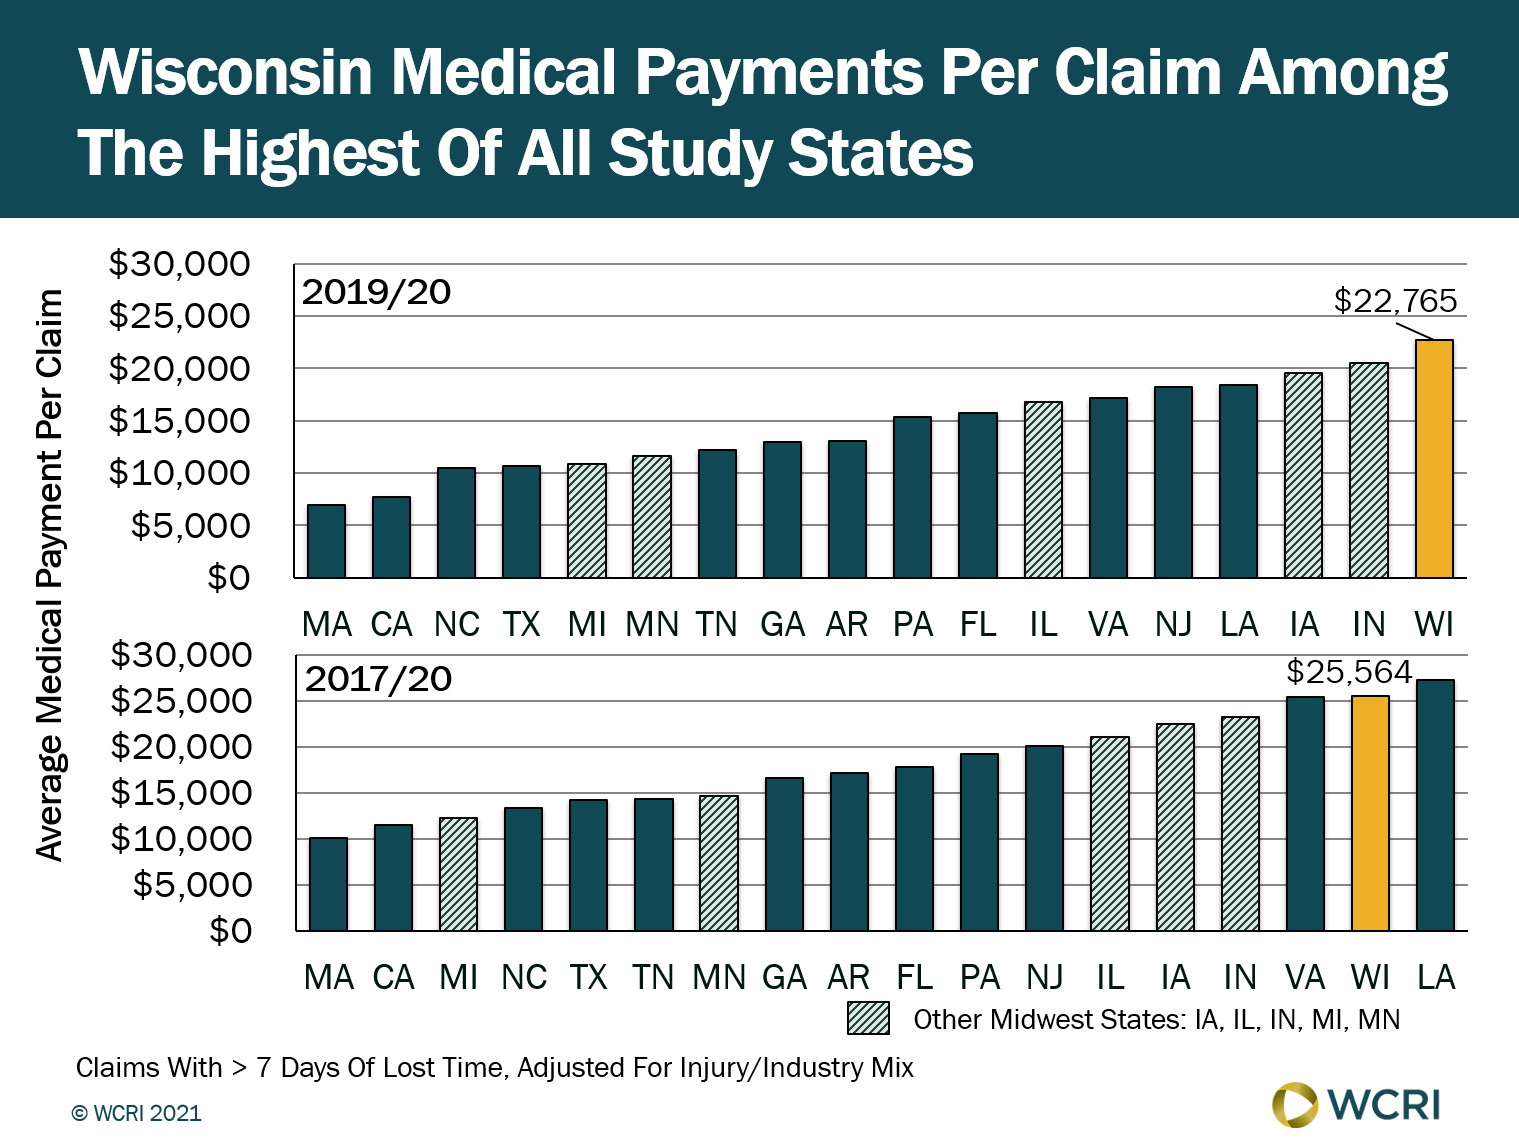 Medical Payments per Workers’ Compensation Claim in Wisconsin among